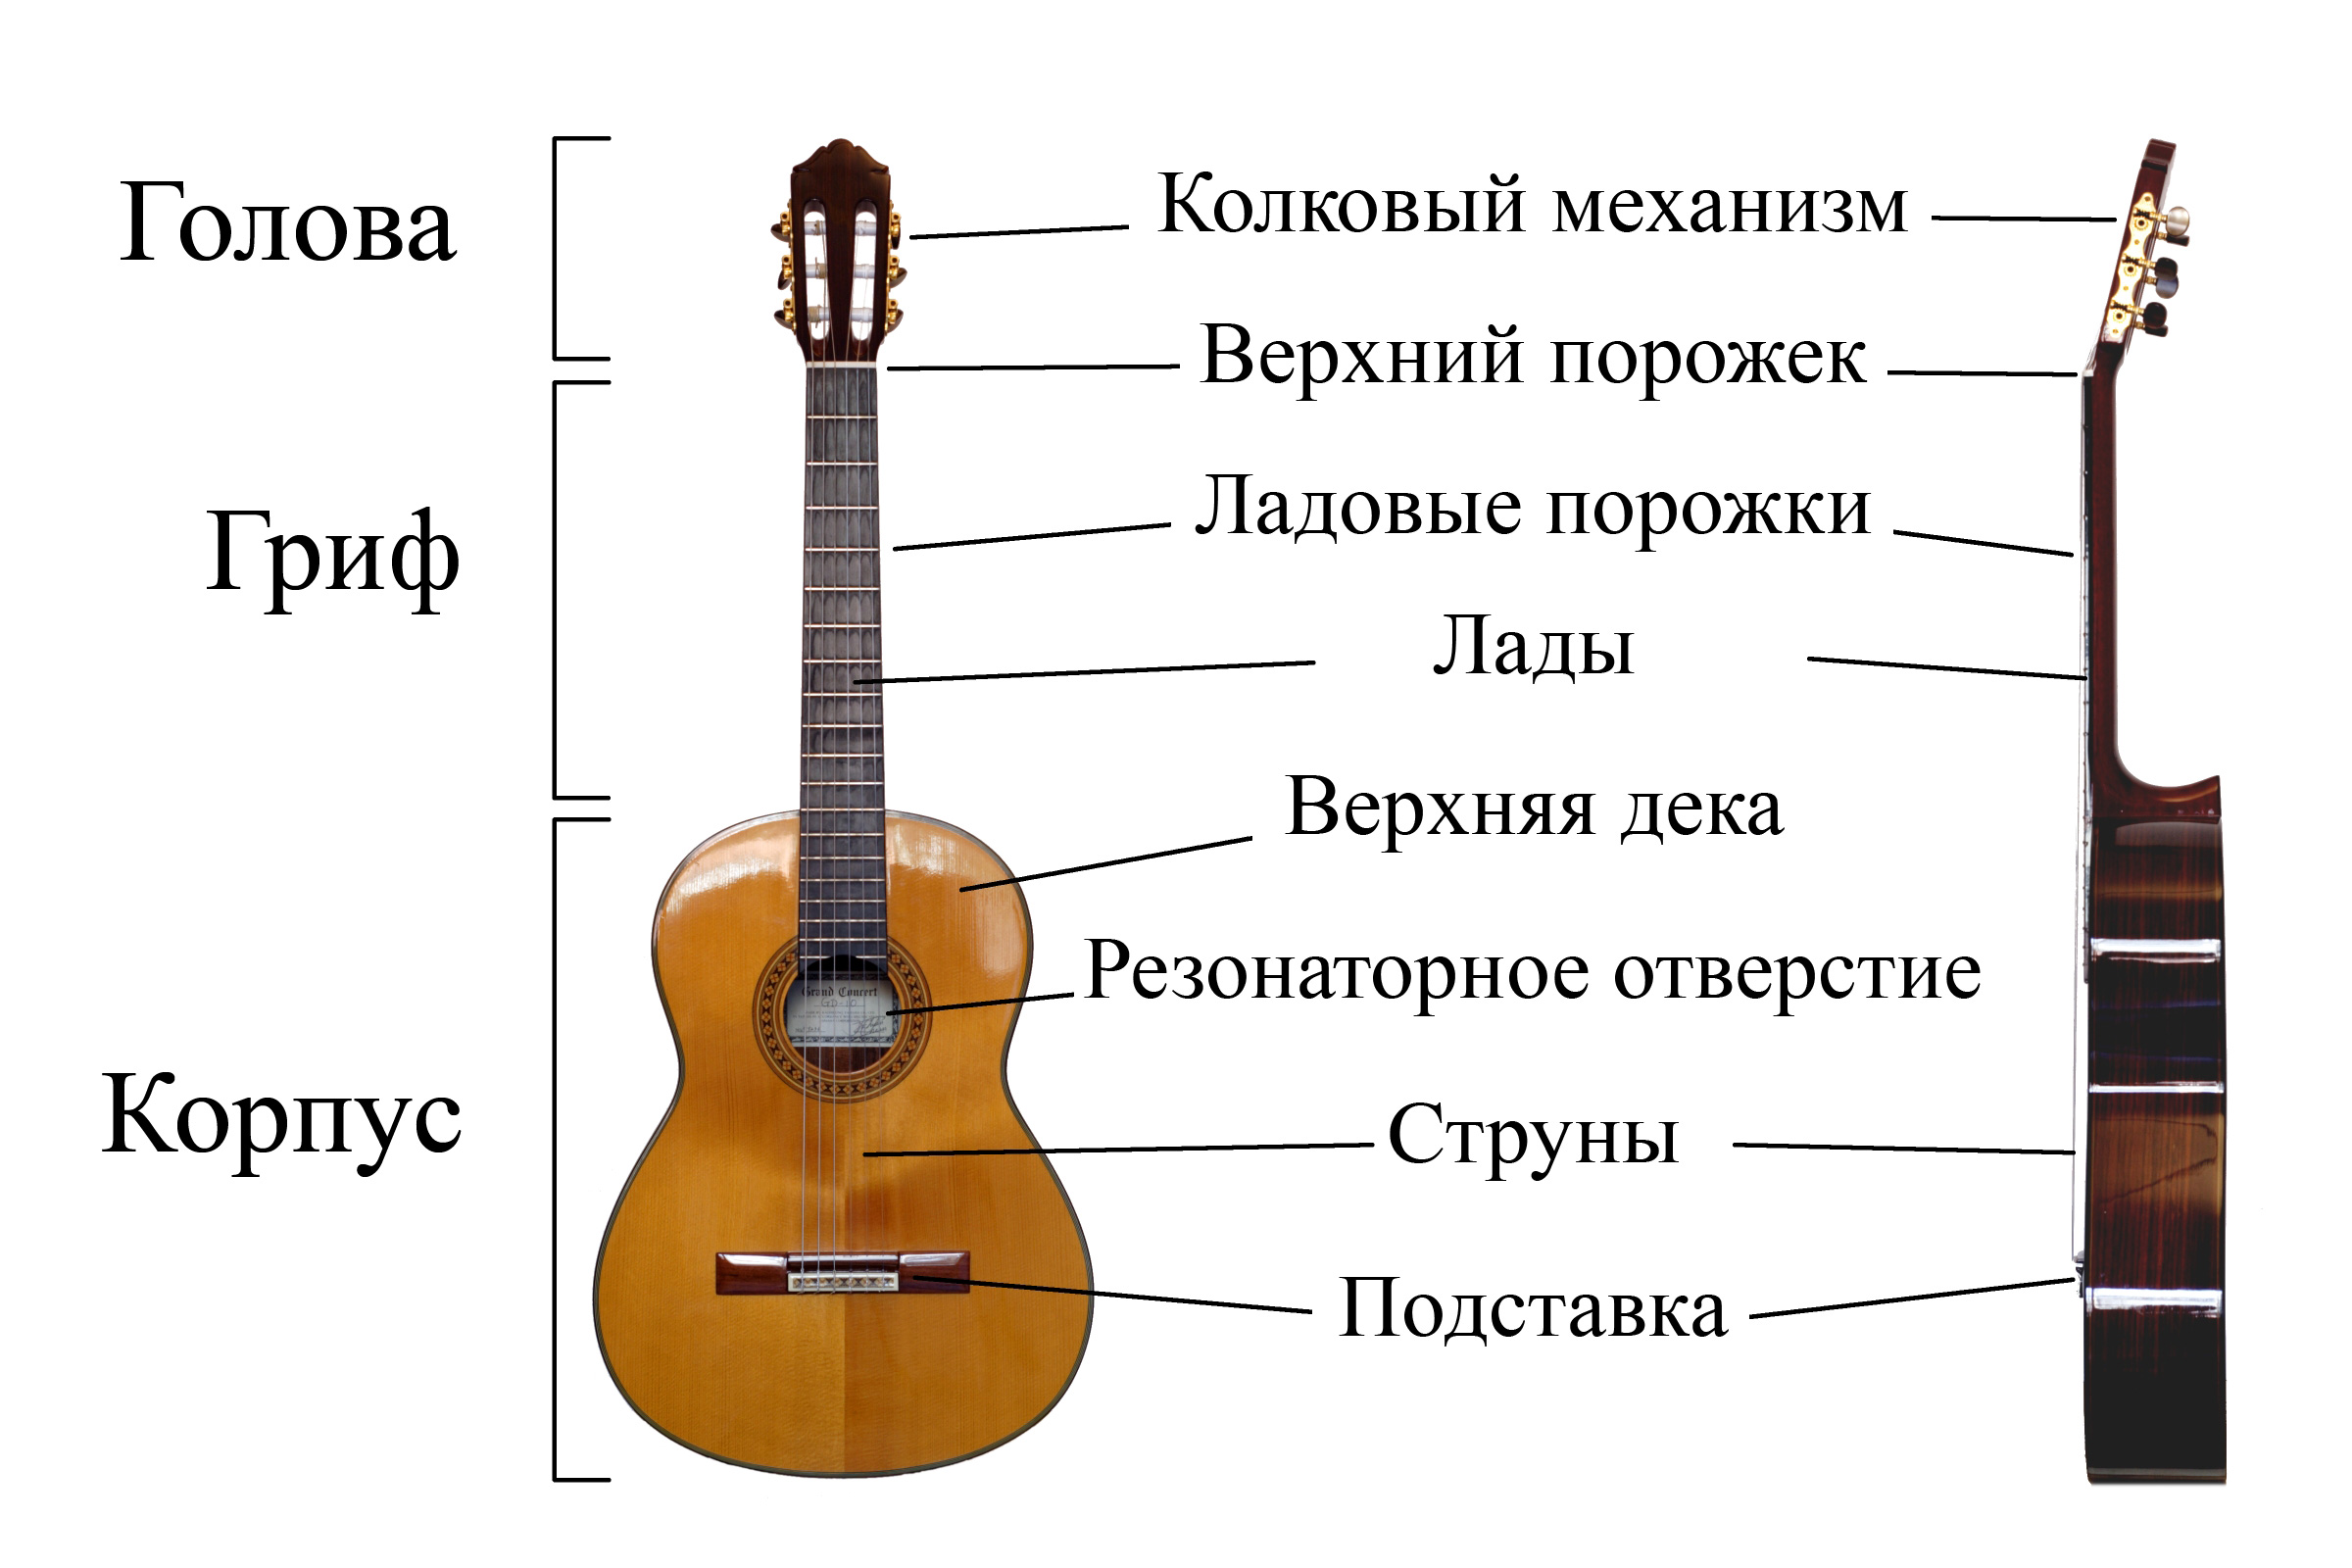 Classical Guitar labelled russian